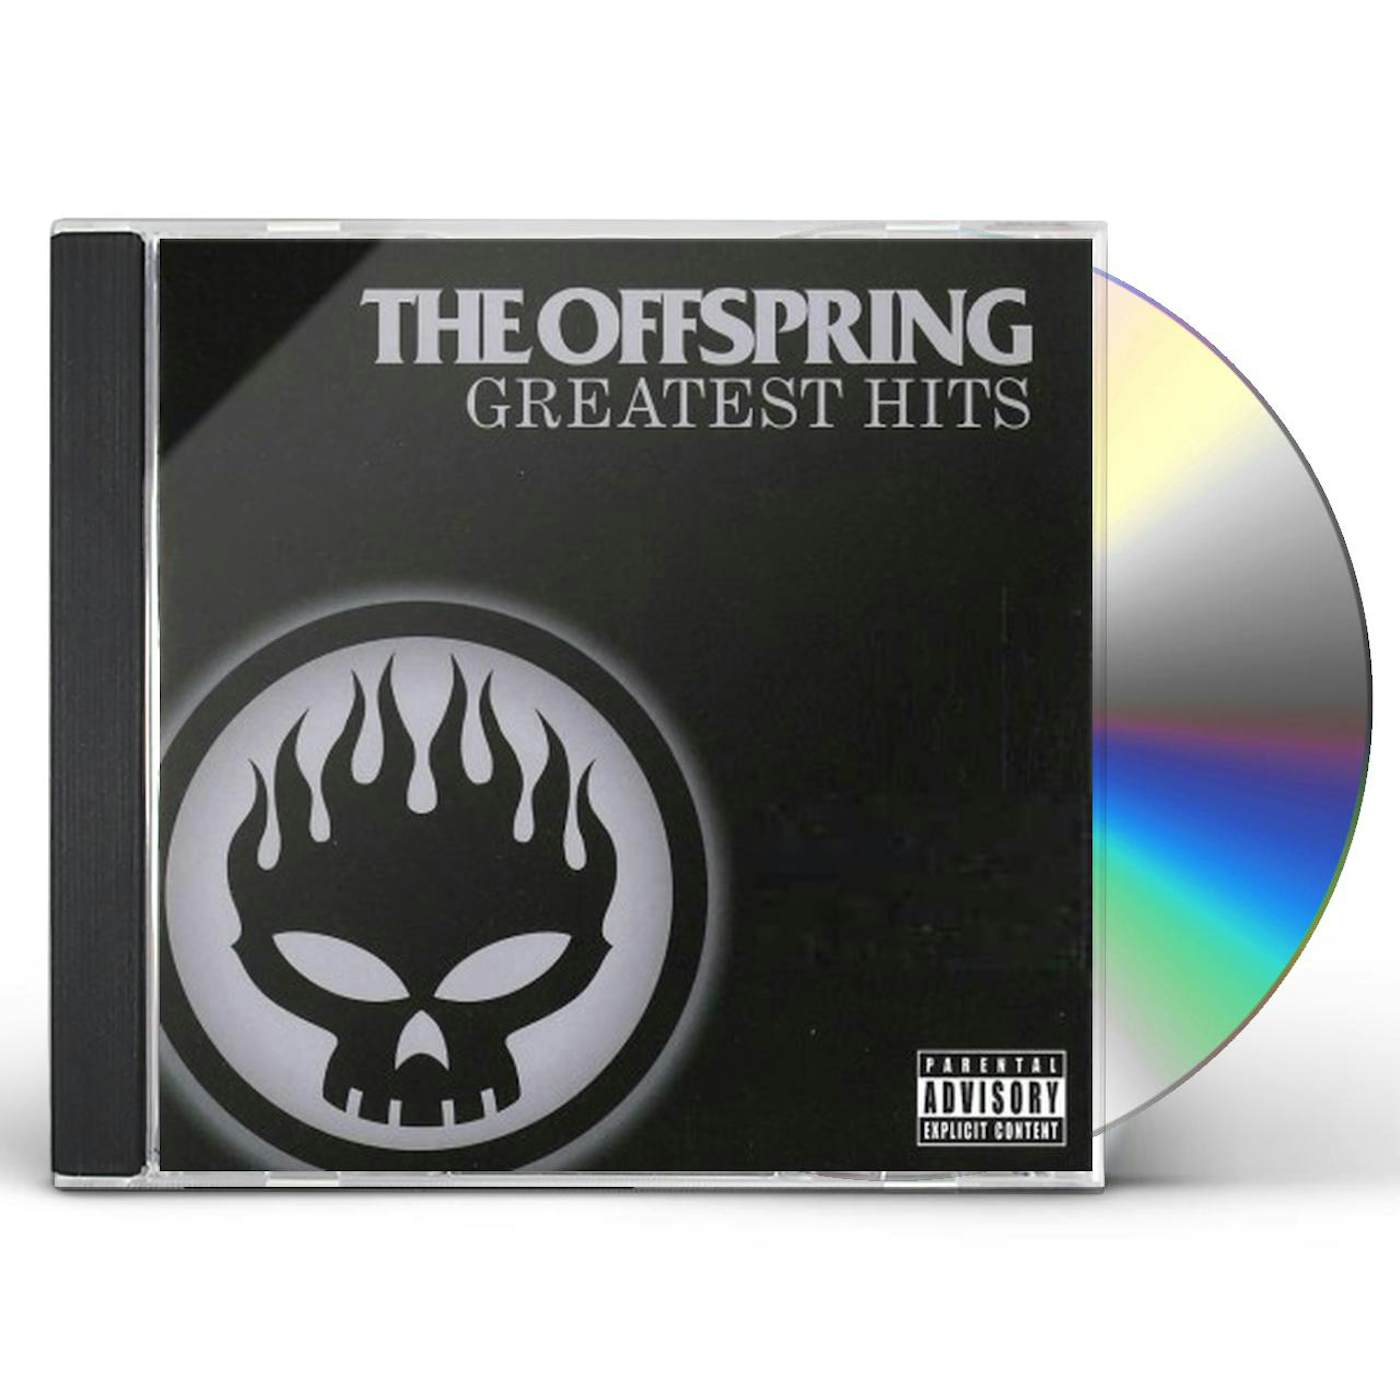 The Offspring GREATEST HITS CD